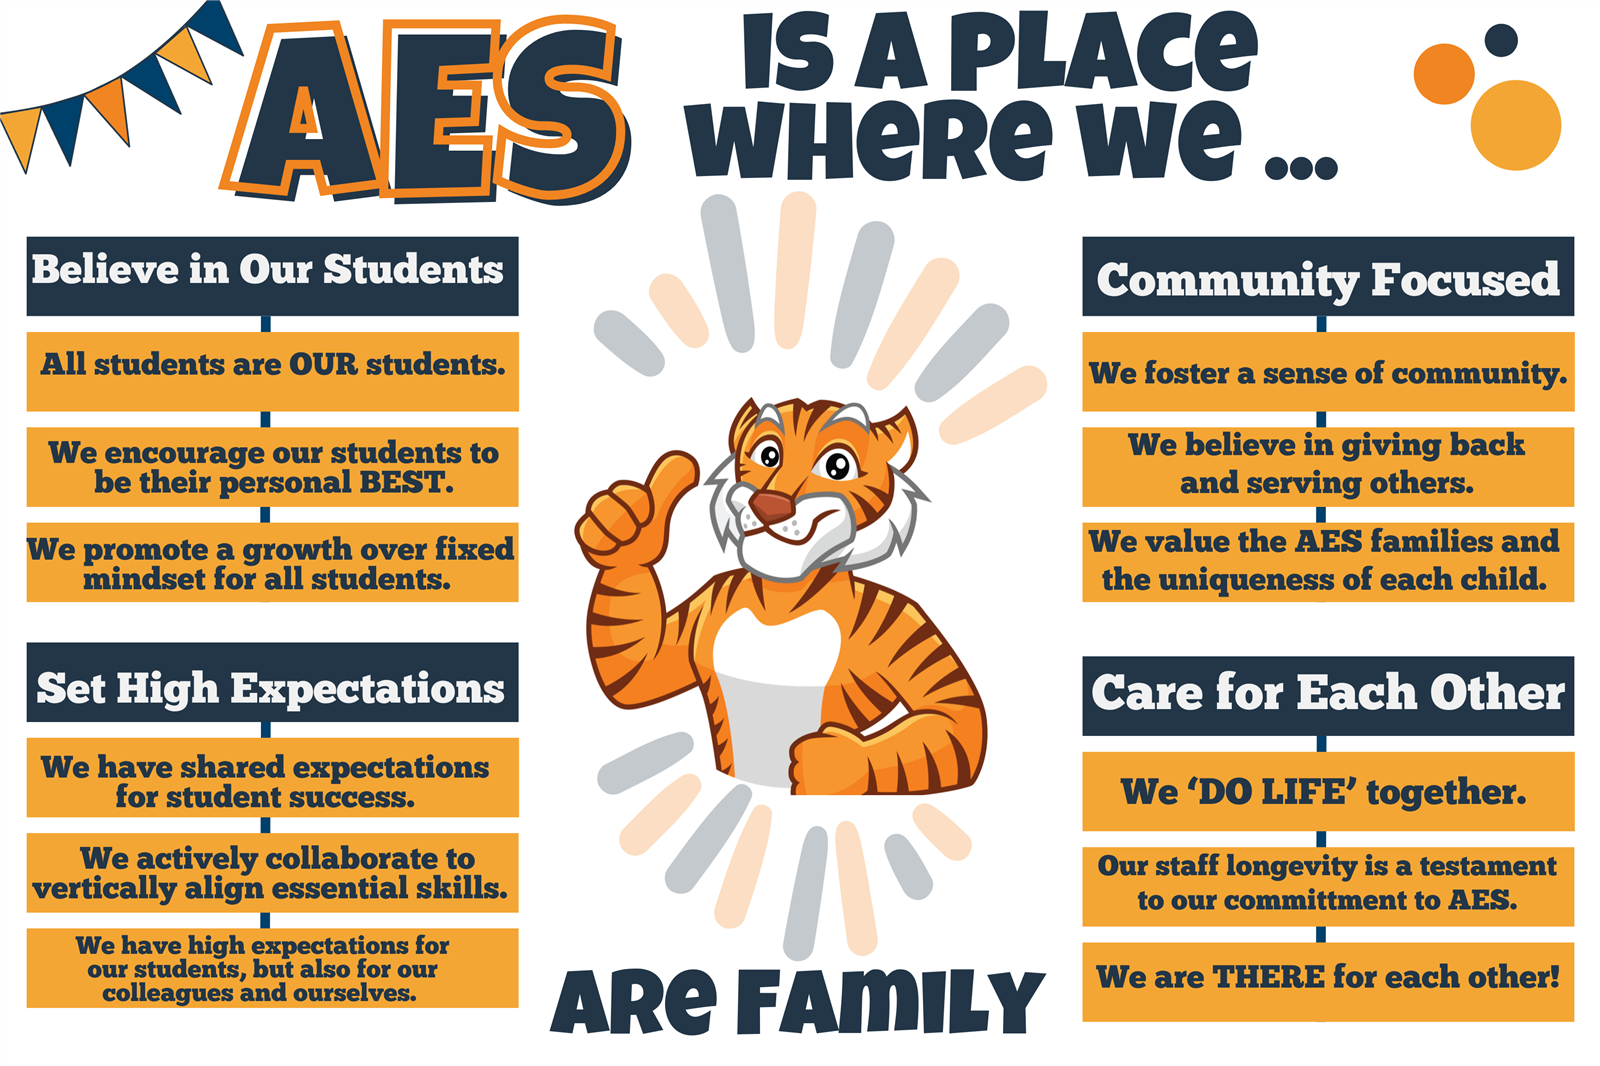 AES is a place where we…Believe in Our Students, Set High Expectations, Community Focused and Care for Each Other.